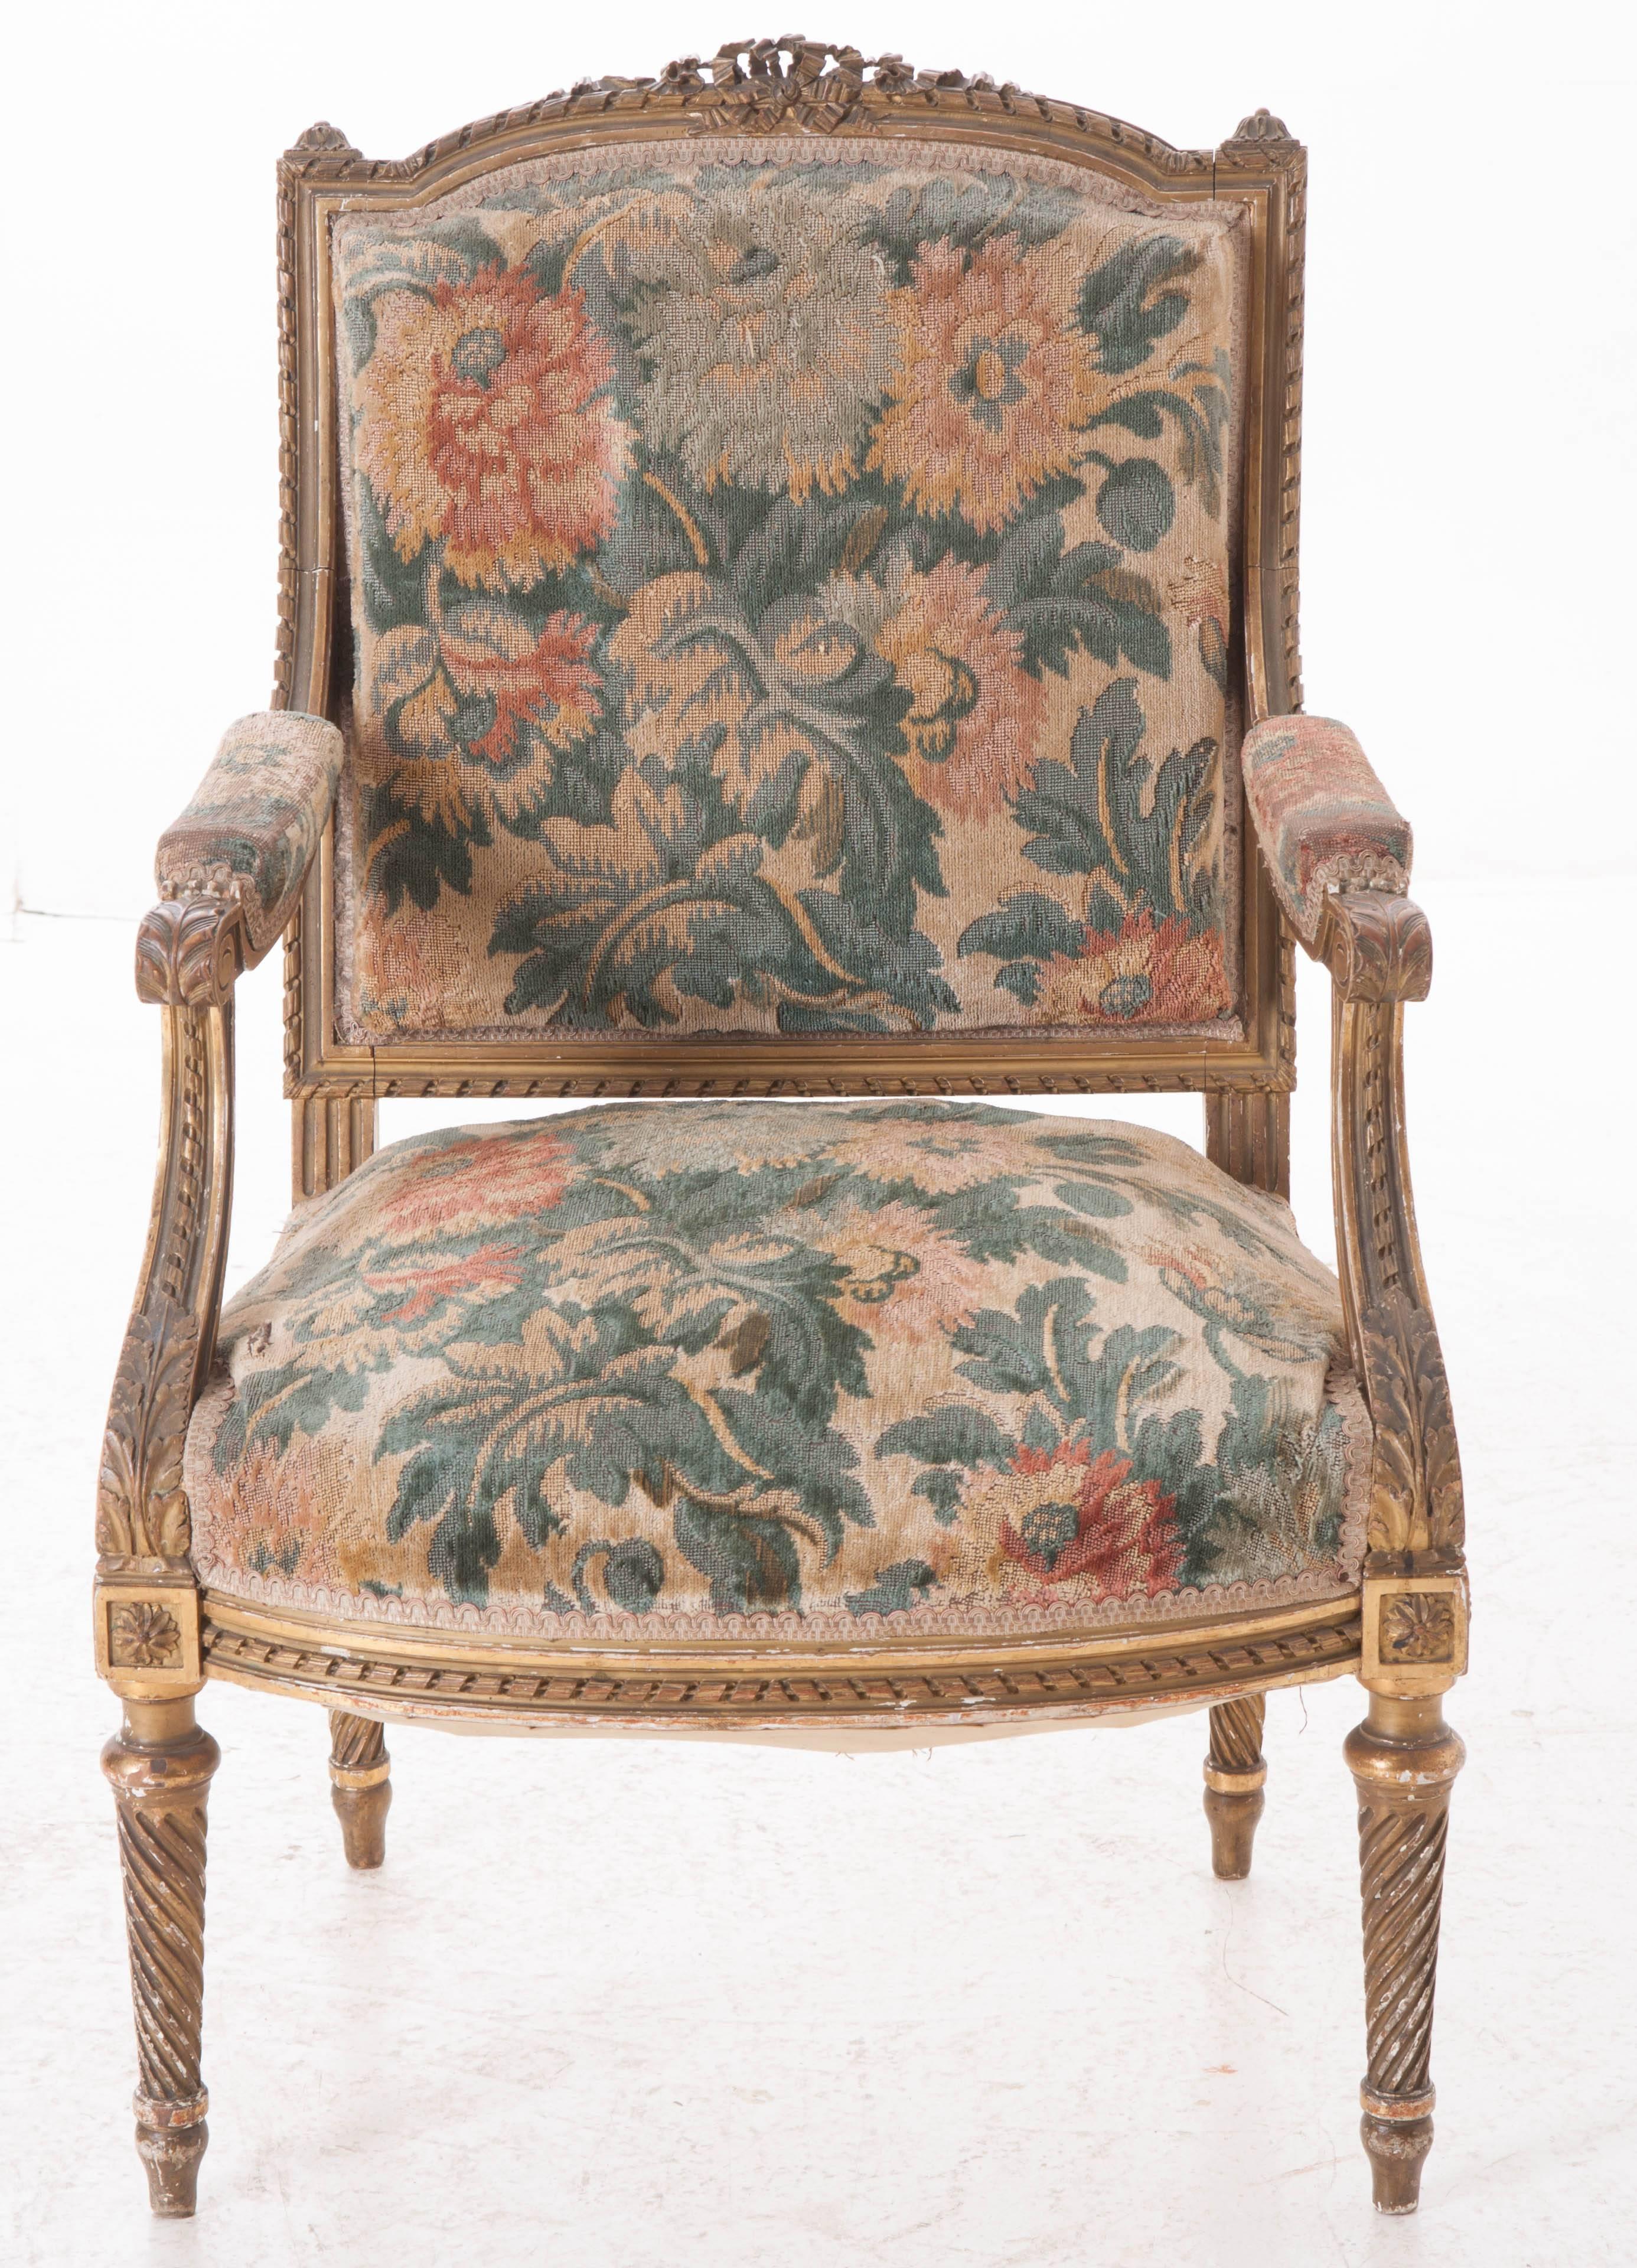 A gorgeous French gold gilt fauteuil that still has its original tapestry upholstery. This Louis XVI style chair features extensive intricate carvings. Its shaped top rail is crowned with a superbly carved bow which rests atop the twisted ribbon